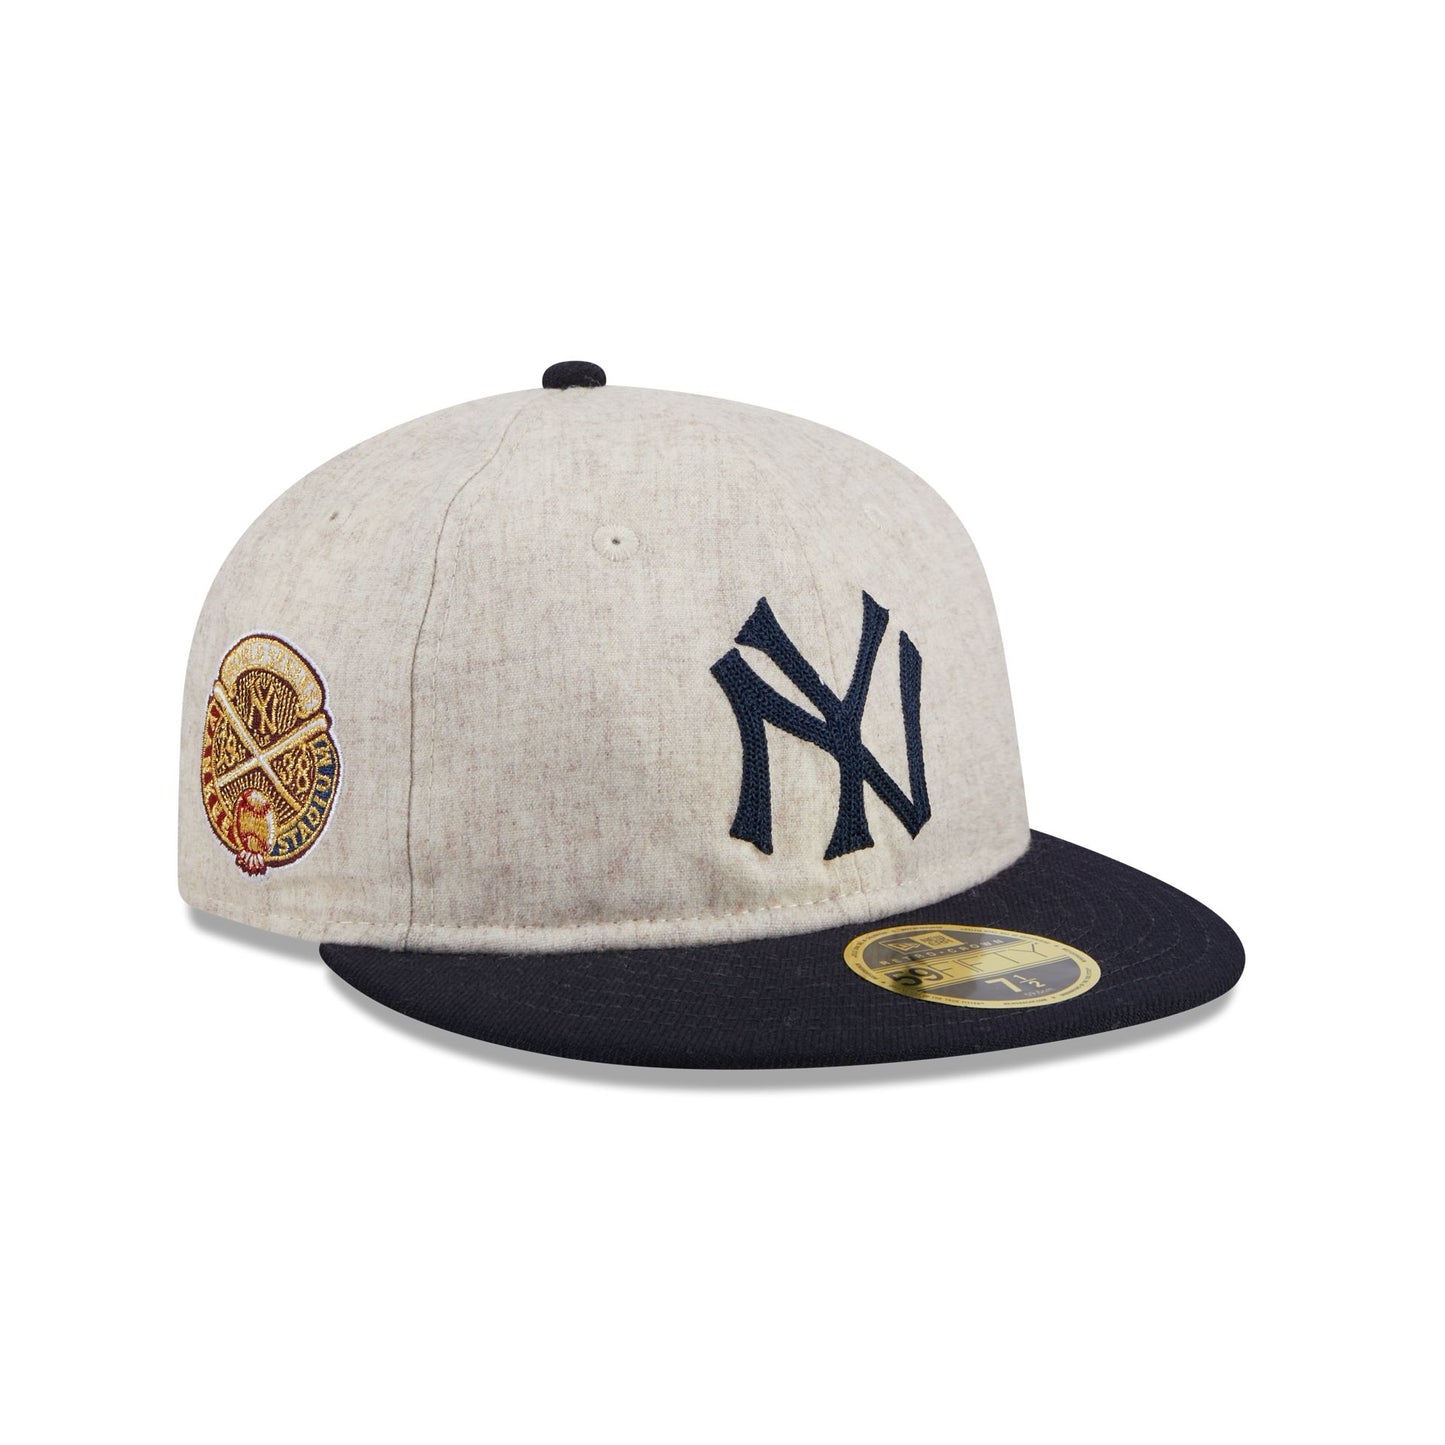 New York Yankees Melton Wool Retro Crown 59FIFTY Fitted Hat, White - Size: 7, MLB by New Era